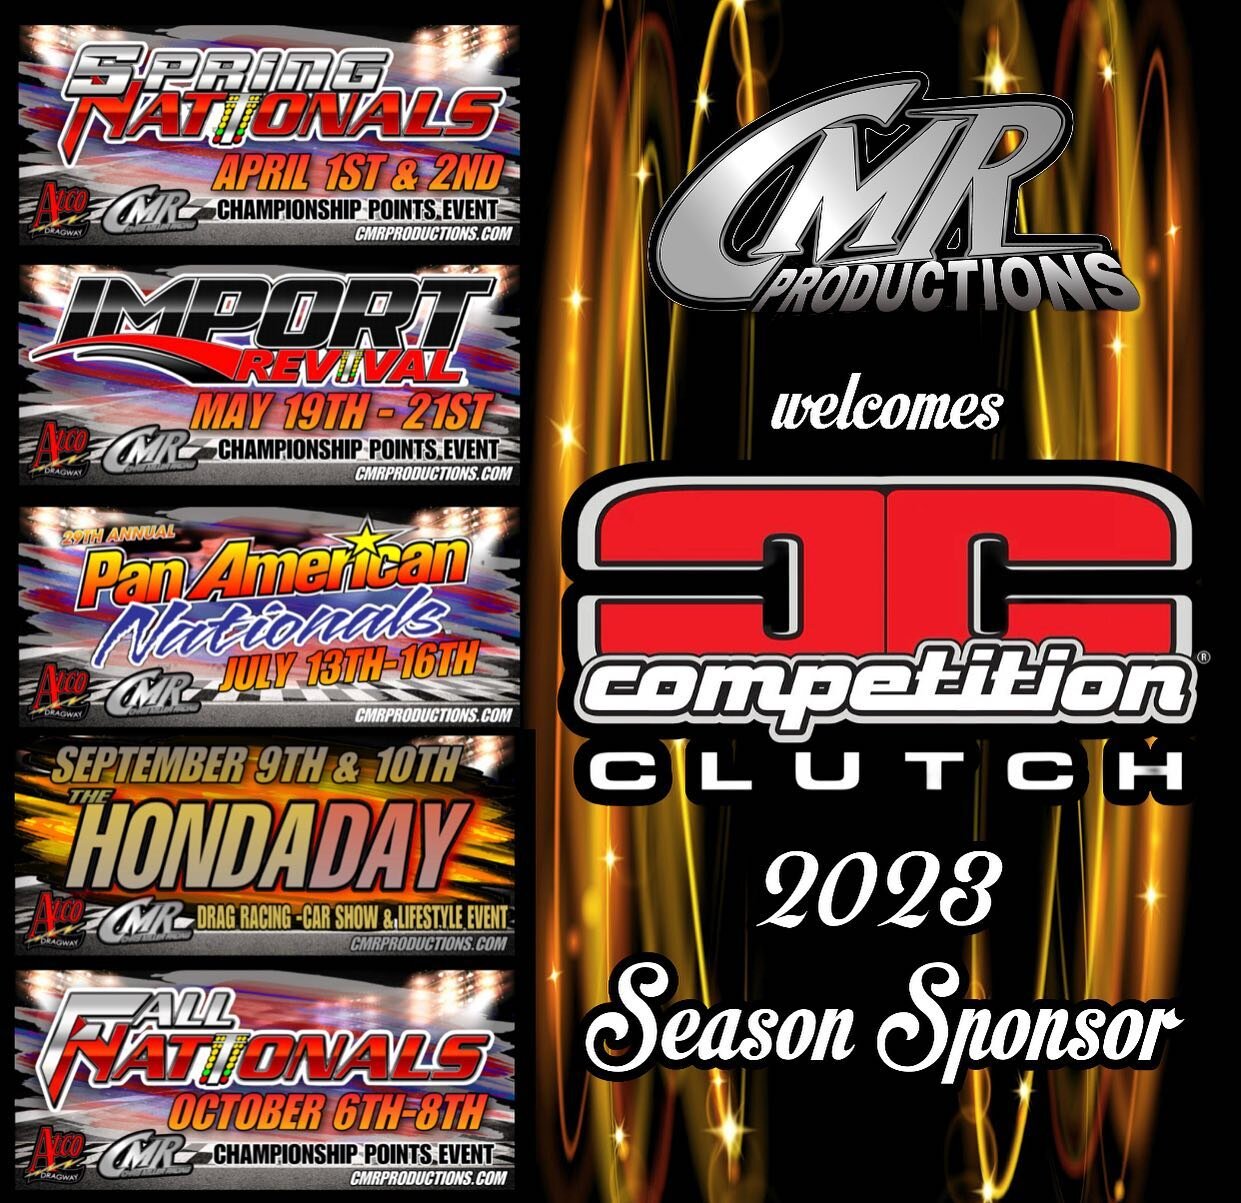 We here at CMR productions want to have everyone welcome @competitionclutch as our series sponsor. 

Next week will be releasing a contingency program for all classes that compete at the CMR events. So please be on the lookout for that info posted he